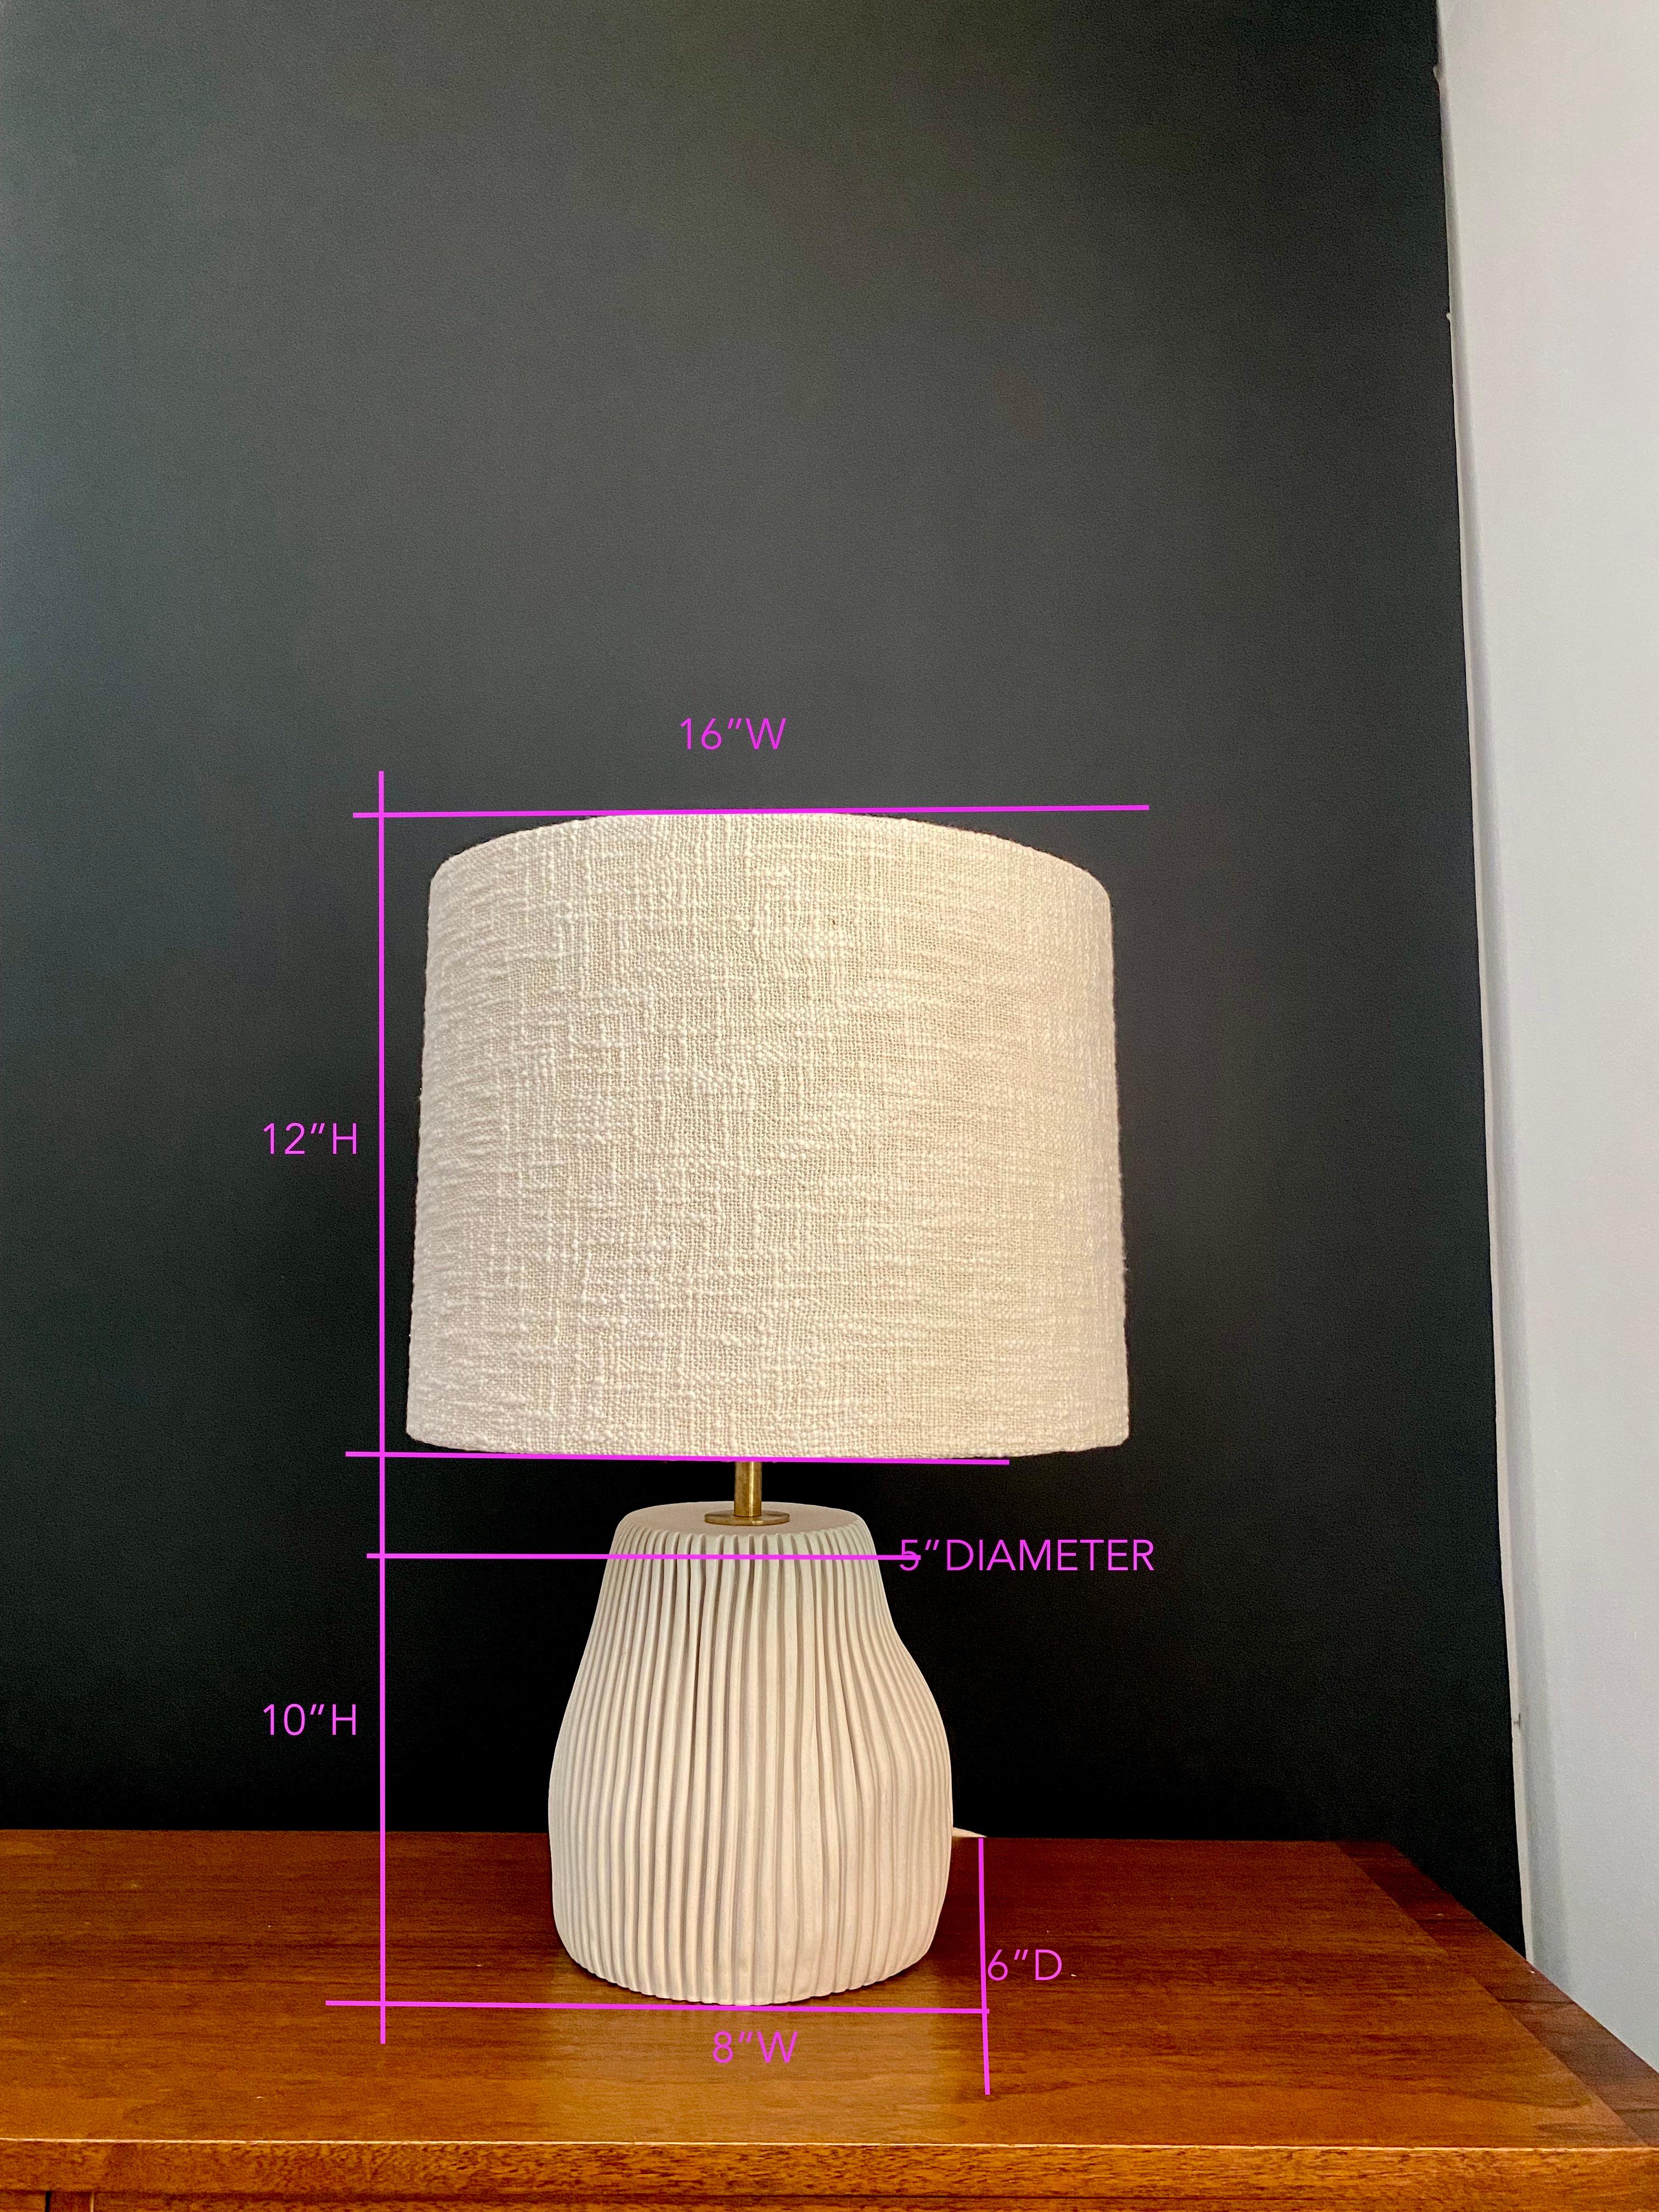 Porcelain base,
6’ cloth covered cord. 
Solid Brass adjustable harp, 
Brass hardware w/ LED dimmer on socket. 
Linen, Burlap or handwoven Bouclé custom lamp shade.
Base Dimensions: 11”High x 10” Wide x 7” Deep (+/- 1